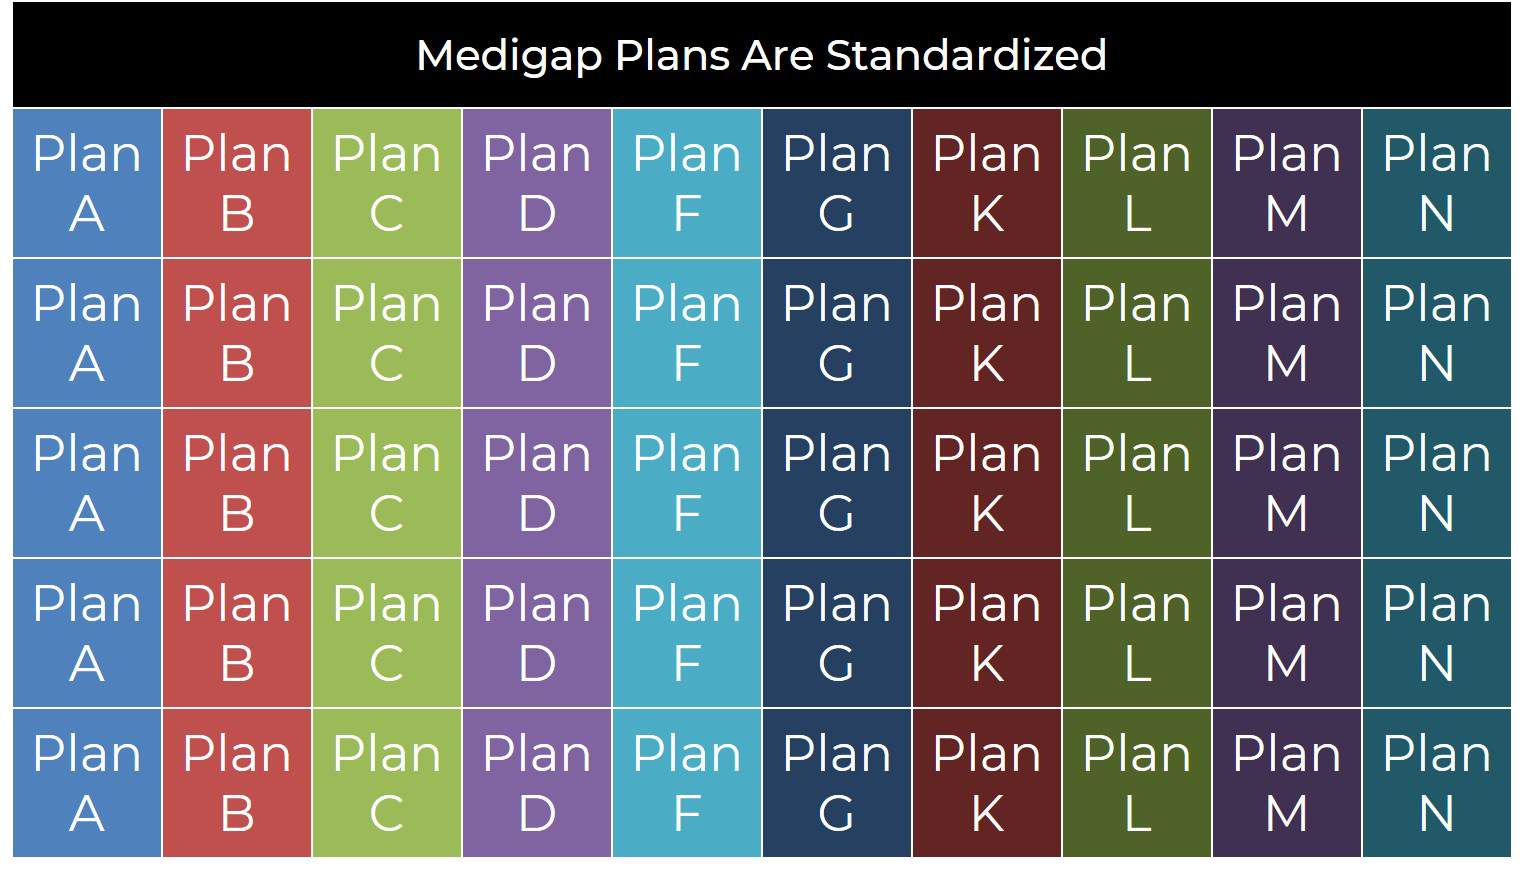 Medigap Policies Were Standardized, health care costs